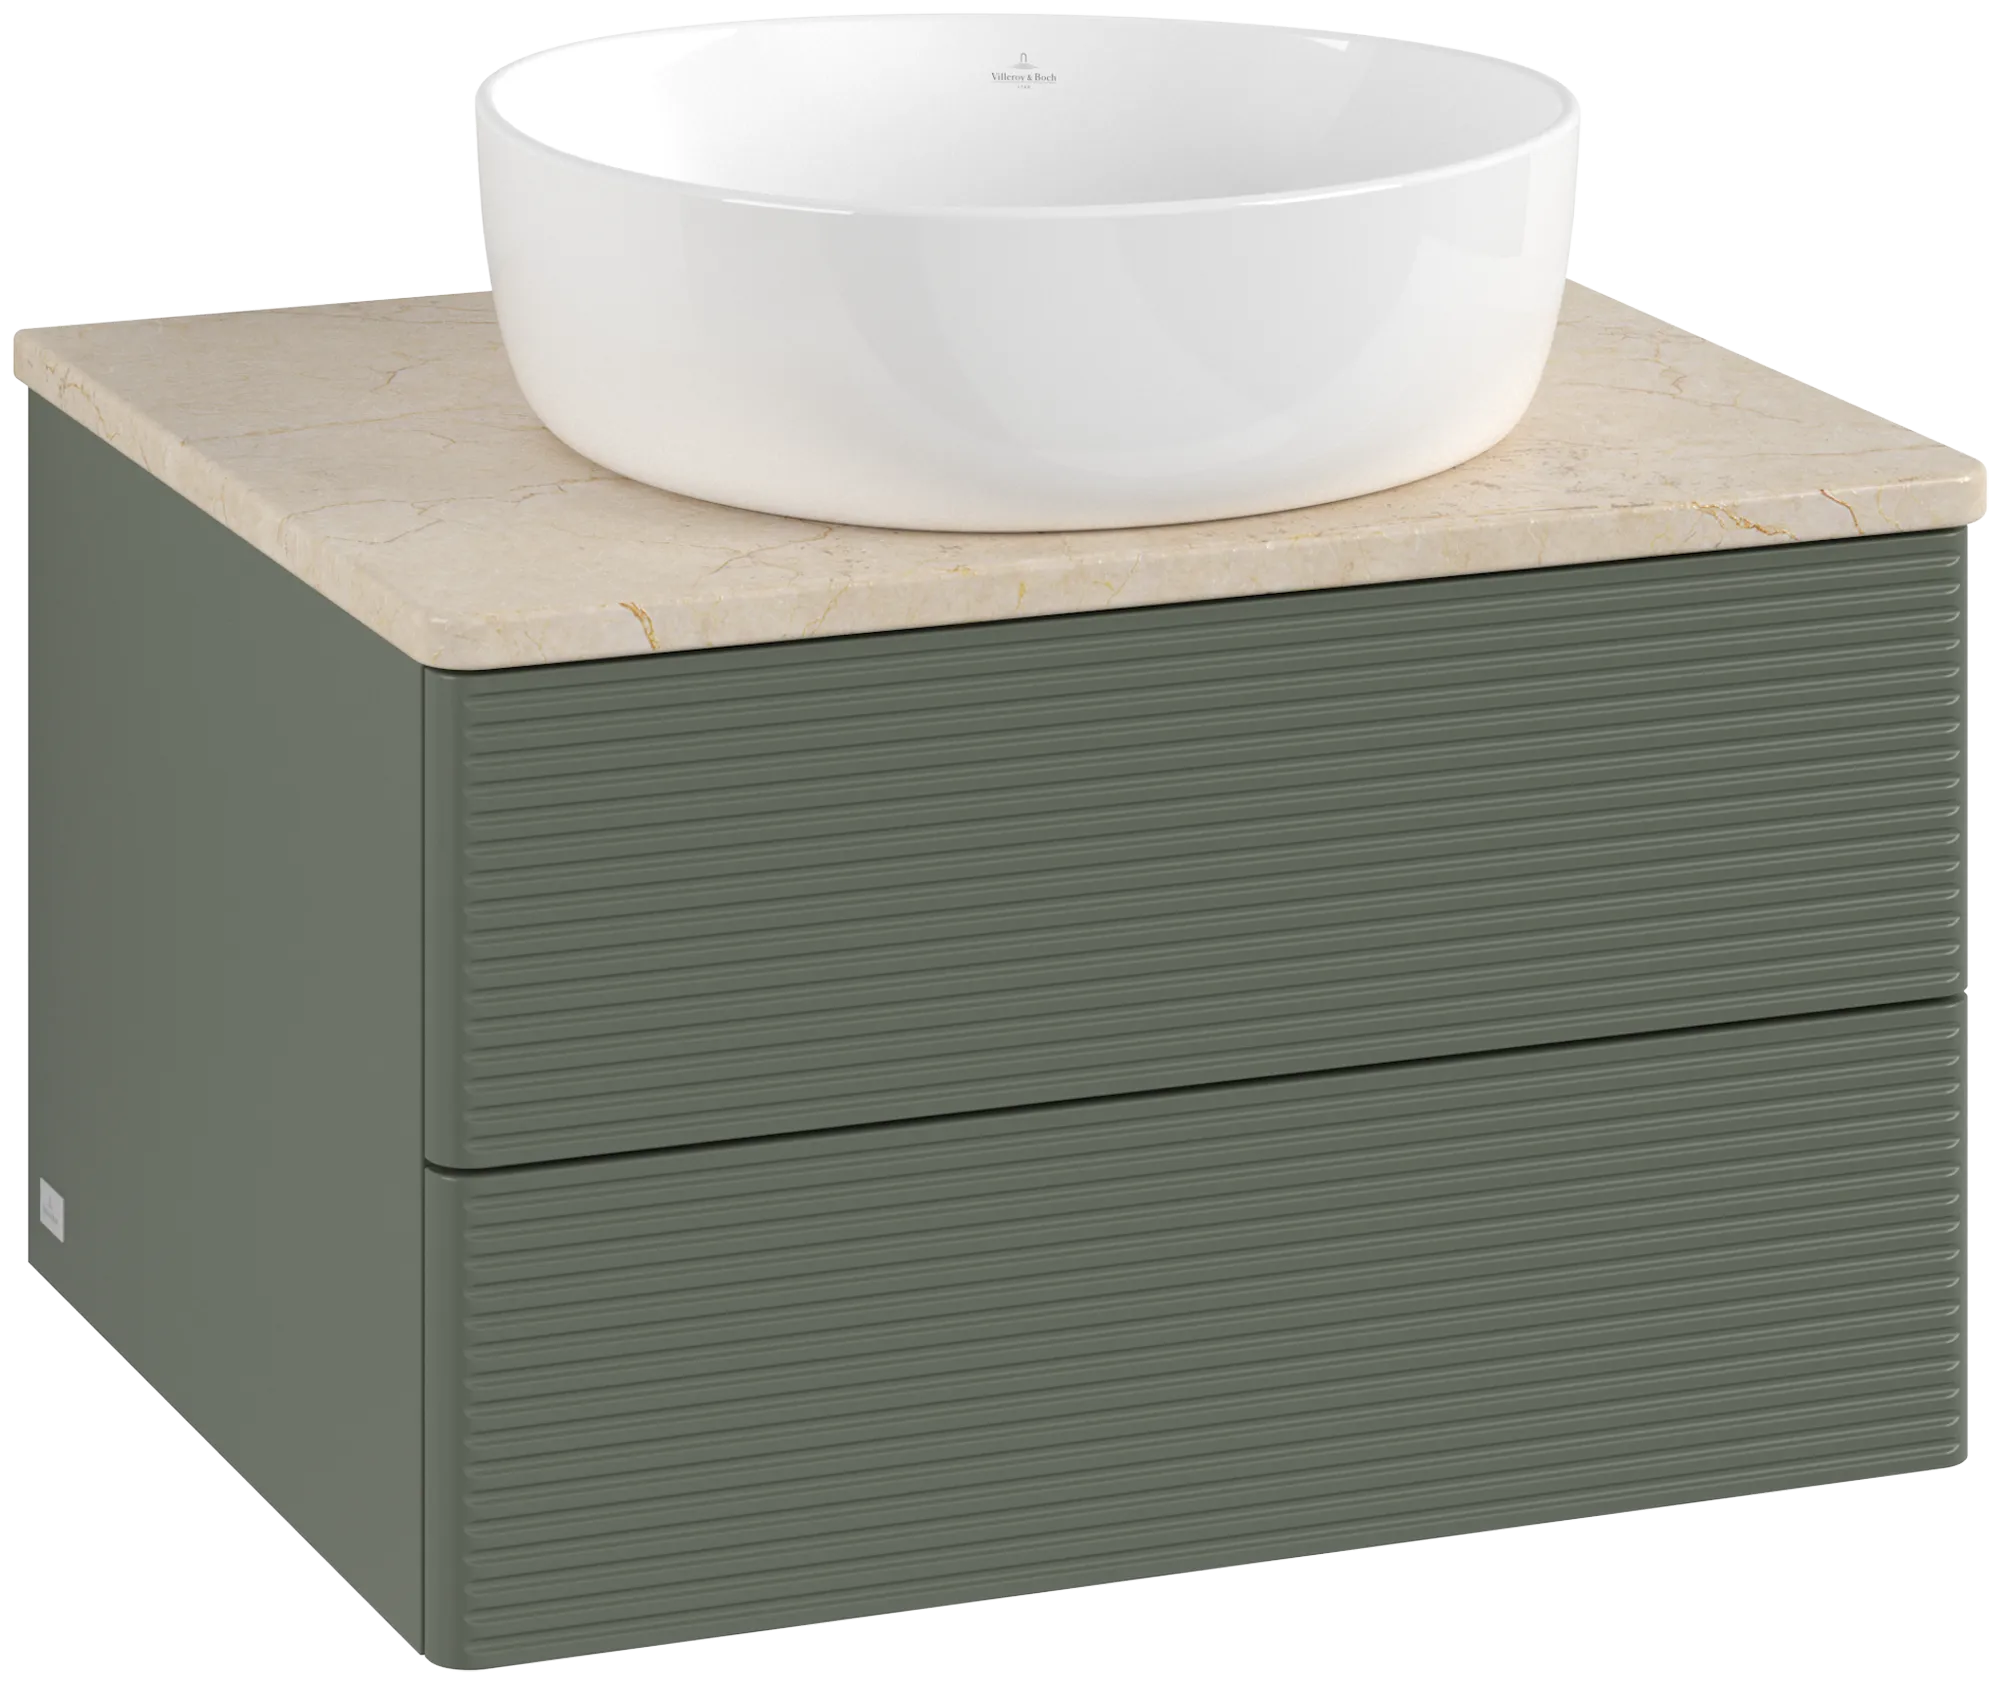 Picture of VILLEROY BOCH Antao Vanity unit, with lighting, 2 pull-out compartments, 600 x 360 x 500 mm, Front with grain texture, Leaf Green Matt Lacquer / Botticino #L18113HL